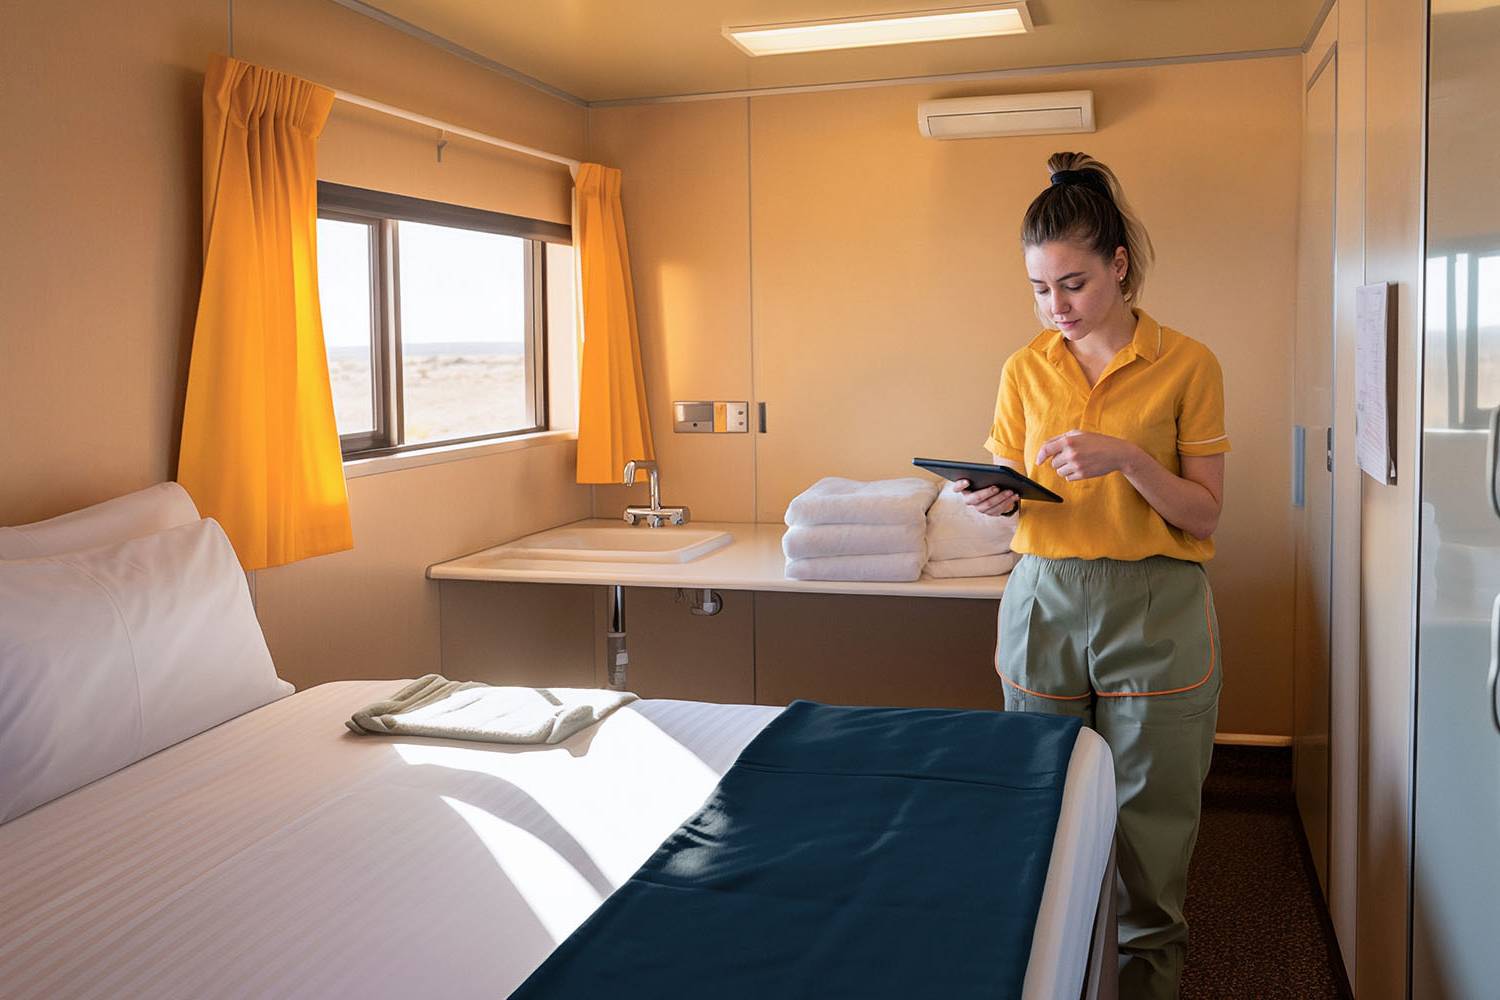 Remote camp attendant studies a tablet in a bedroom recently cleaned by her.